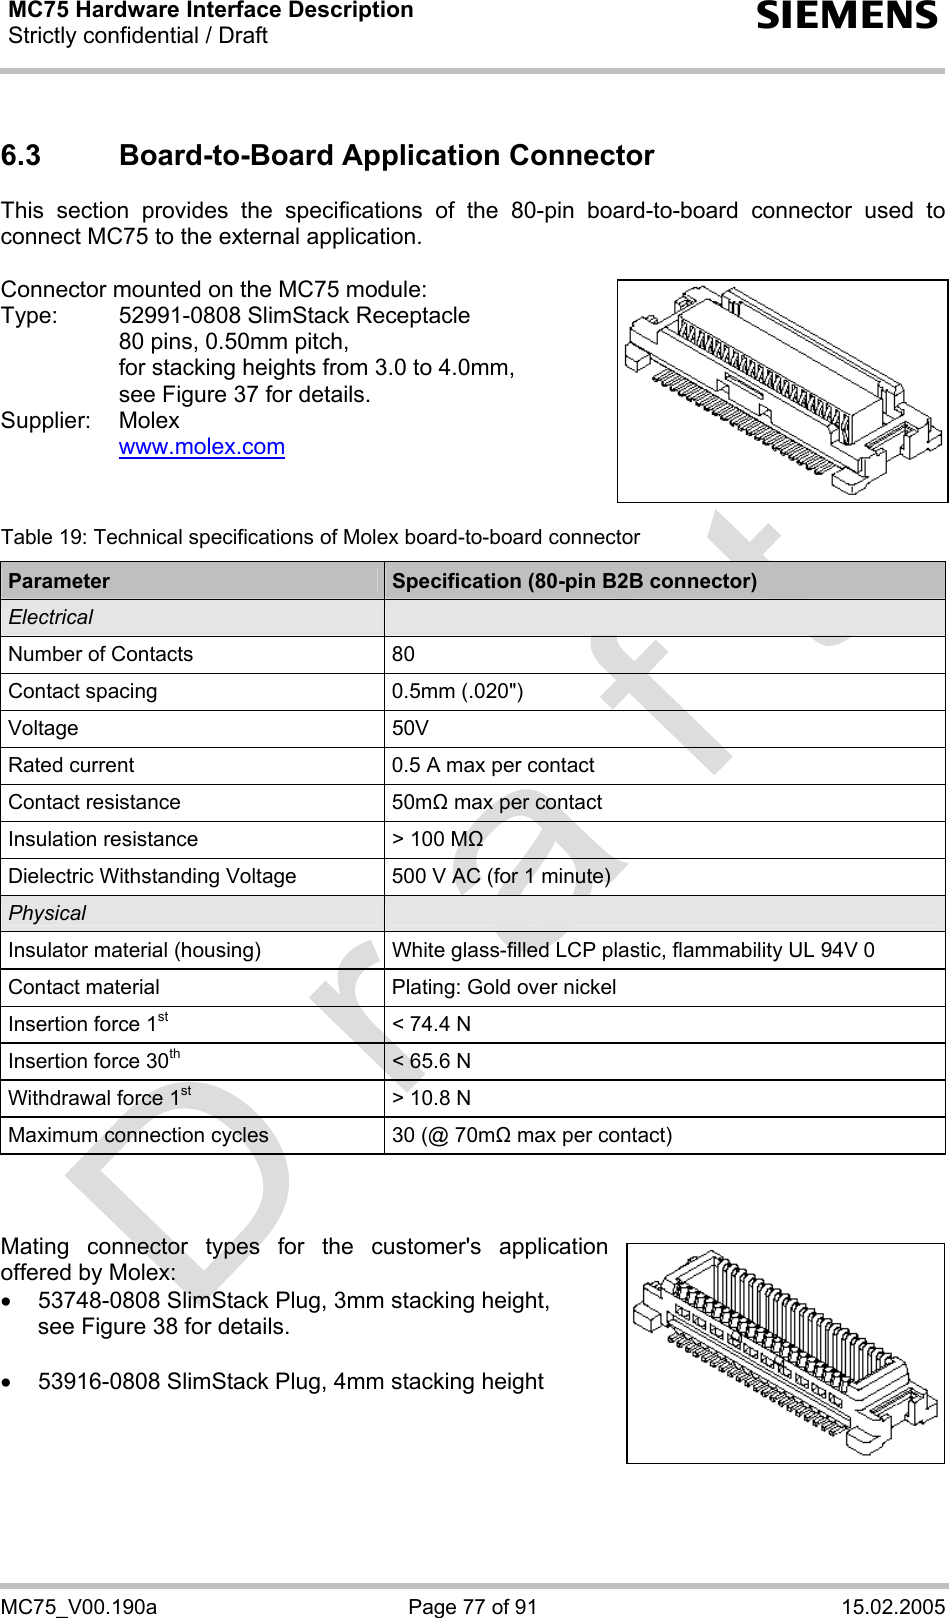 MC75 Hardware Interface Description Strictly confidential / Draft  s MC75_V00.190a  Page 77 of 91  15.02.2005 6.3  Board-to-Board Application Connector This section provides the specifications of the 80-pin board-to-board connector used to connect MC75 to the external application.   Connector mounted on the MC75 module: Type:  52991-0808 SlimStack Receptacle    80 pins, 0.50mm pitch,   for stacking heights from 3.0 to 4.0mm,   see Figure 37 for details. Supplier: Molex   www.molex.com    Table 19: Technical specifications of Molex board-to-board connector Parameter  Specification (80-pin B2B connector) Electrical   Number of Contacts  80 Contact spacing  0.5mm (.020&quot;) Voltage 50V Rated current  0.5 A max per contact Contact resistance  50mΩ max per contact Insulation resistance  &gt; 100 MΩ Dielectric Withstanding Voltage  500 V AC (for 1 minute) Physical   Insulator material (housing)  White glass-filled LCP plastic, flammability UL 94V 0 Contact material  Plating: Gold over nickel Insertion force 1st  &lt; 74.4 N Insertion force 30th  &lt; 65.6 N Withdrawal force 1st  &gt; 10.8 N Maximum connection cycles  30 (@ 70mΩ max per contact)    Mating connector types for the customer&apos;s application offered by Molex:  •  53748-0808 SlimStack Plug, 3mm stacking height, see Figure 38 for details.  •  53916-0808 SlimStack Plug, 4mm stacking height     